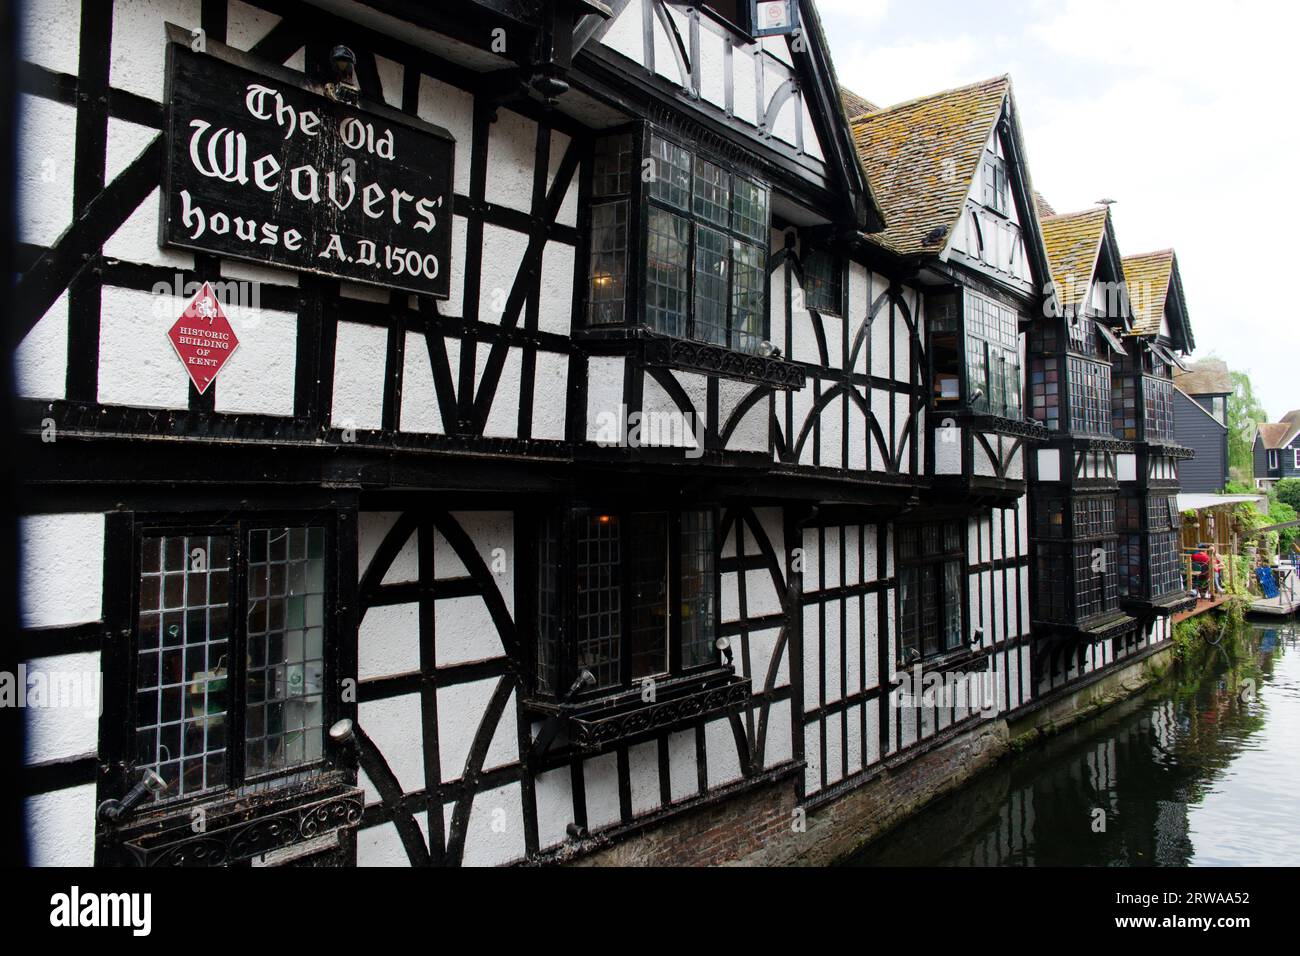 The old Weavers house. Canterbury, England. Stock Photo